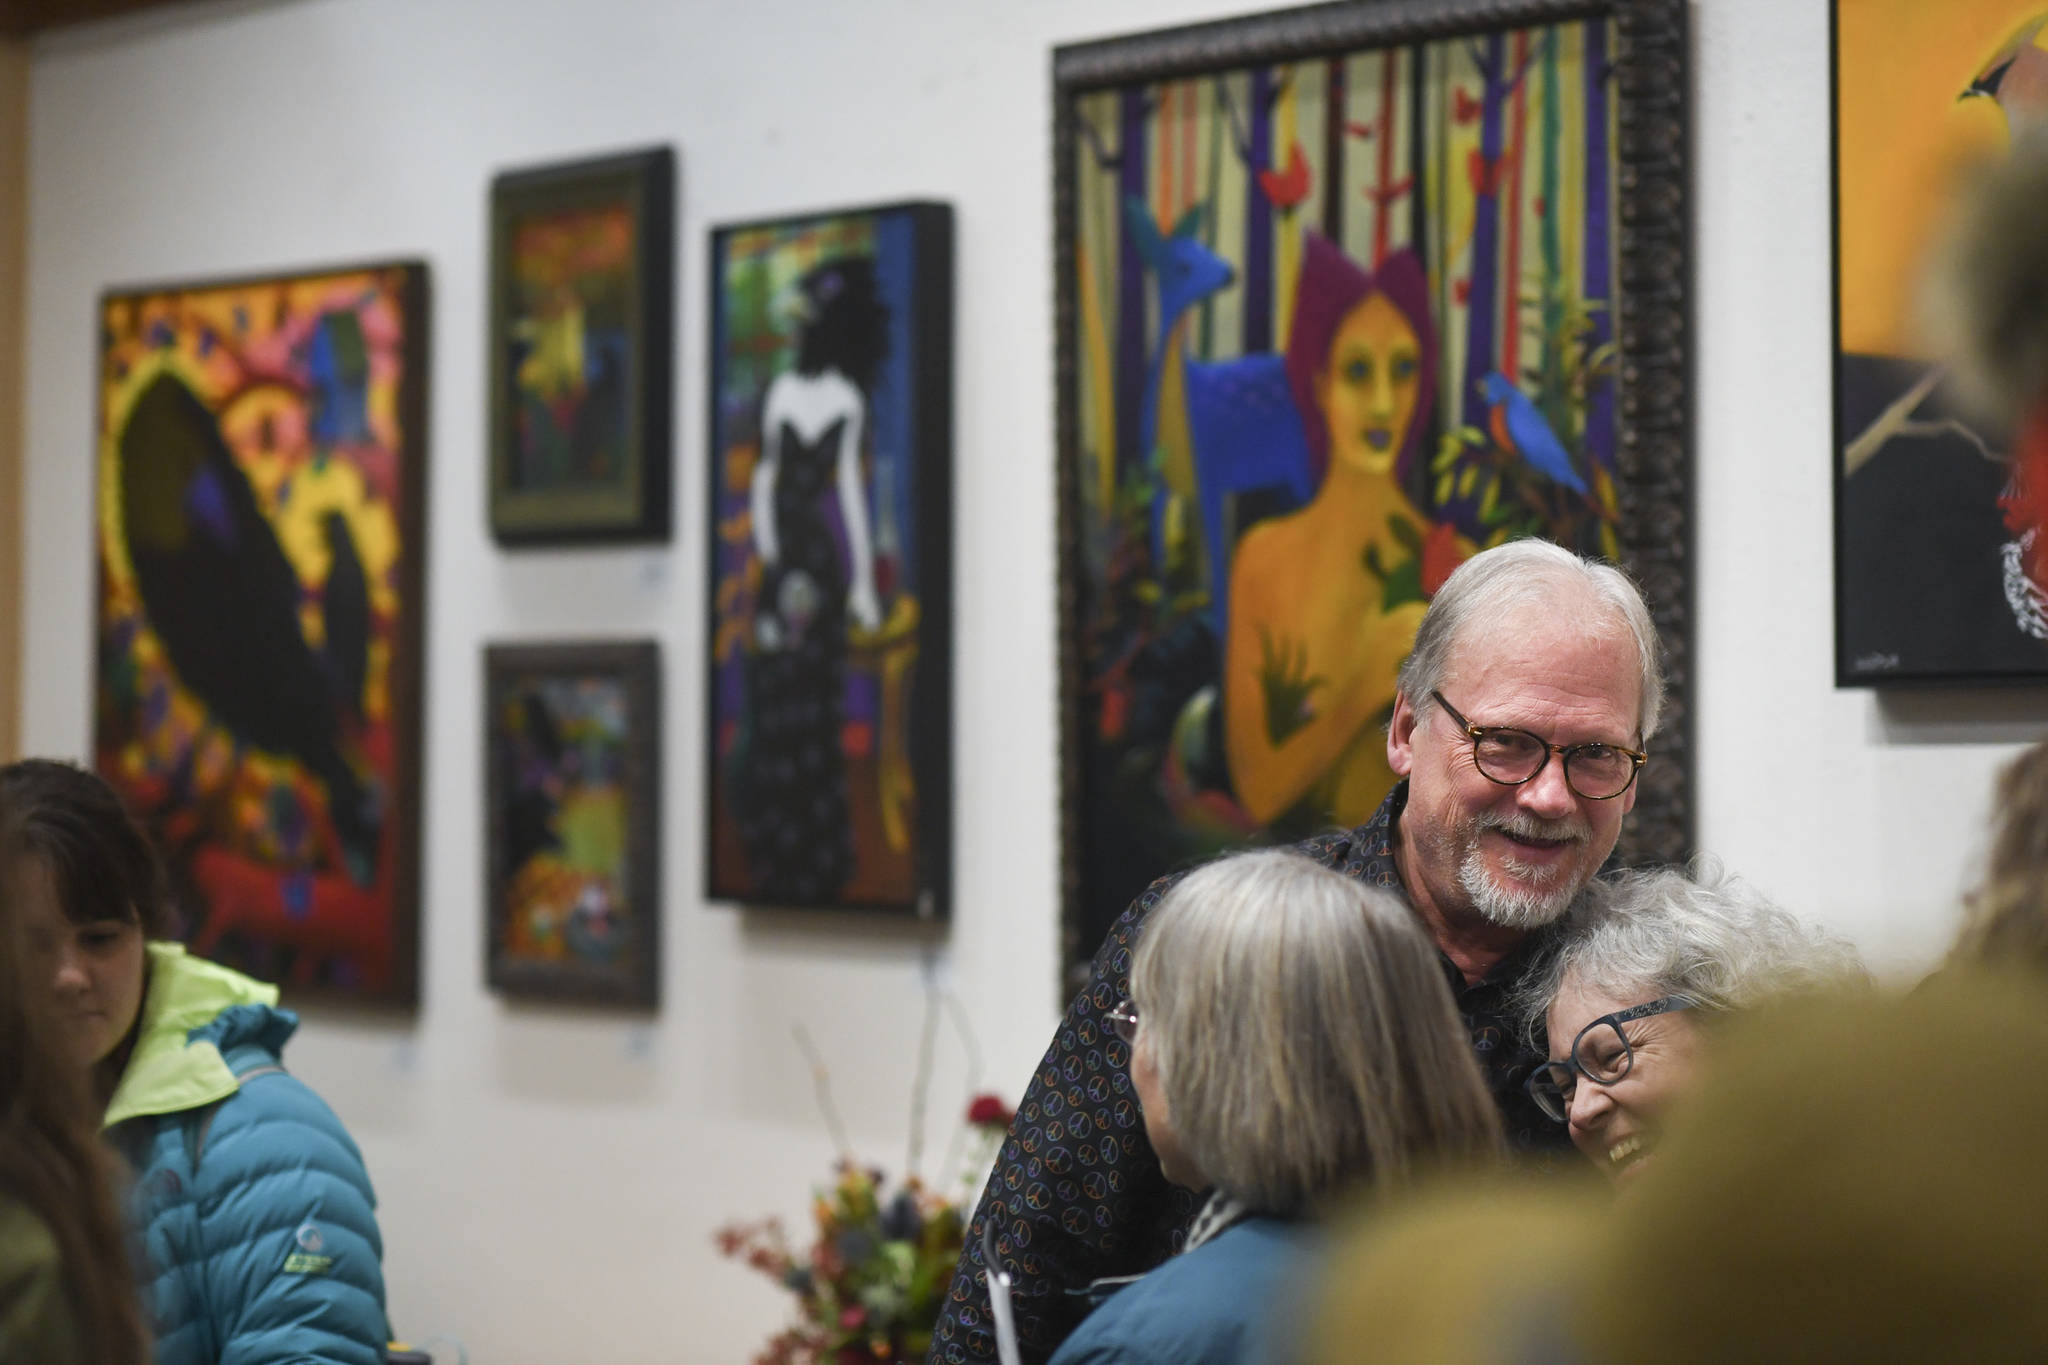 Rick Clair is greeted by friends while showing his latest work at Annie Kaill’s during Gallery Walk on Friday, Dec. 6, 2019. (Michael Penn | Juneau Empire)